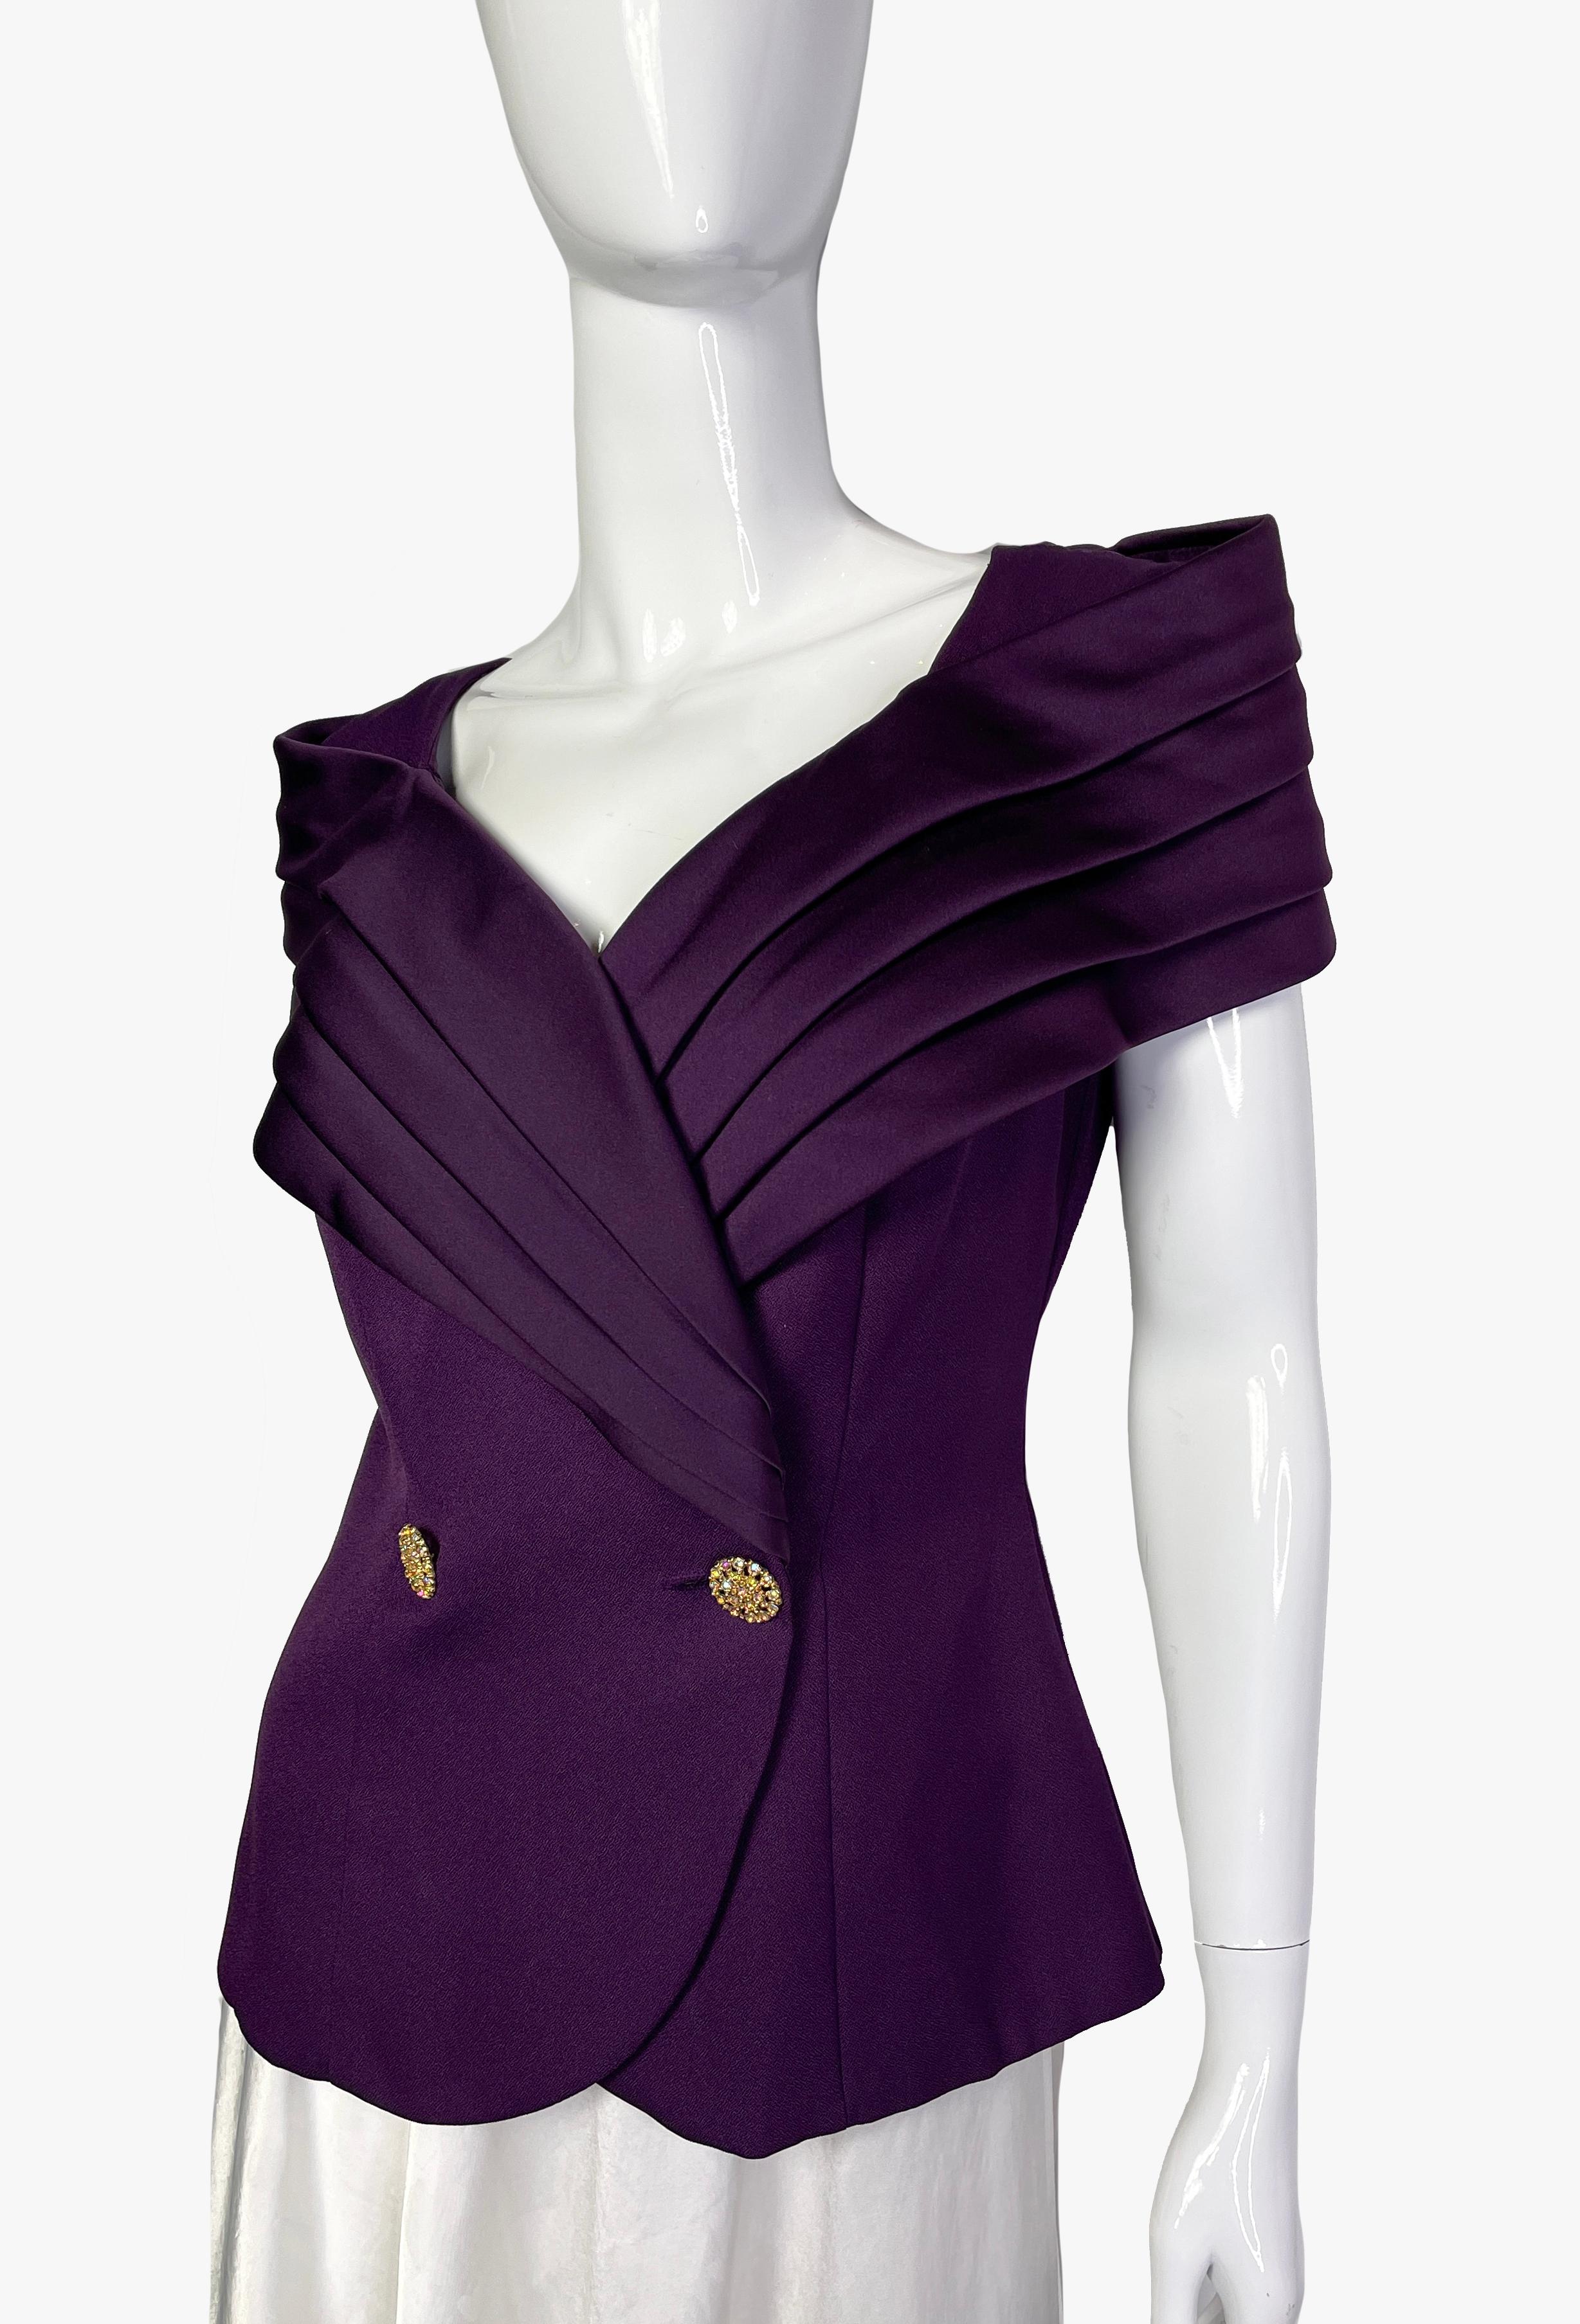 Oleg Cassini vintage evening top, 1980s In Good Condition For Sale In New York, NY